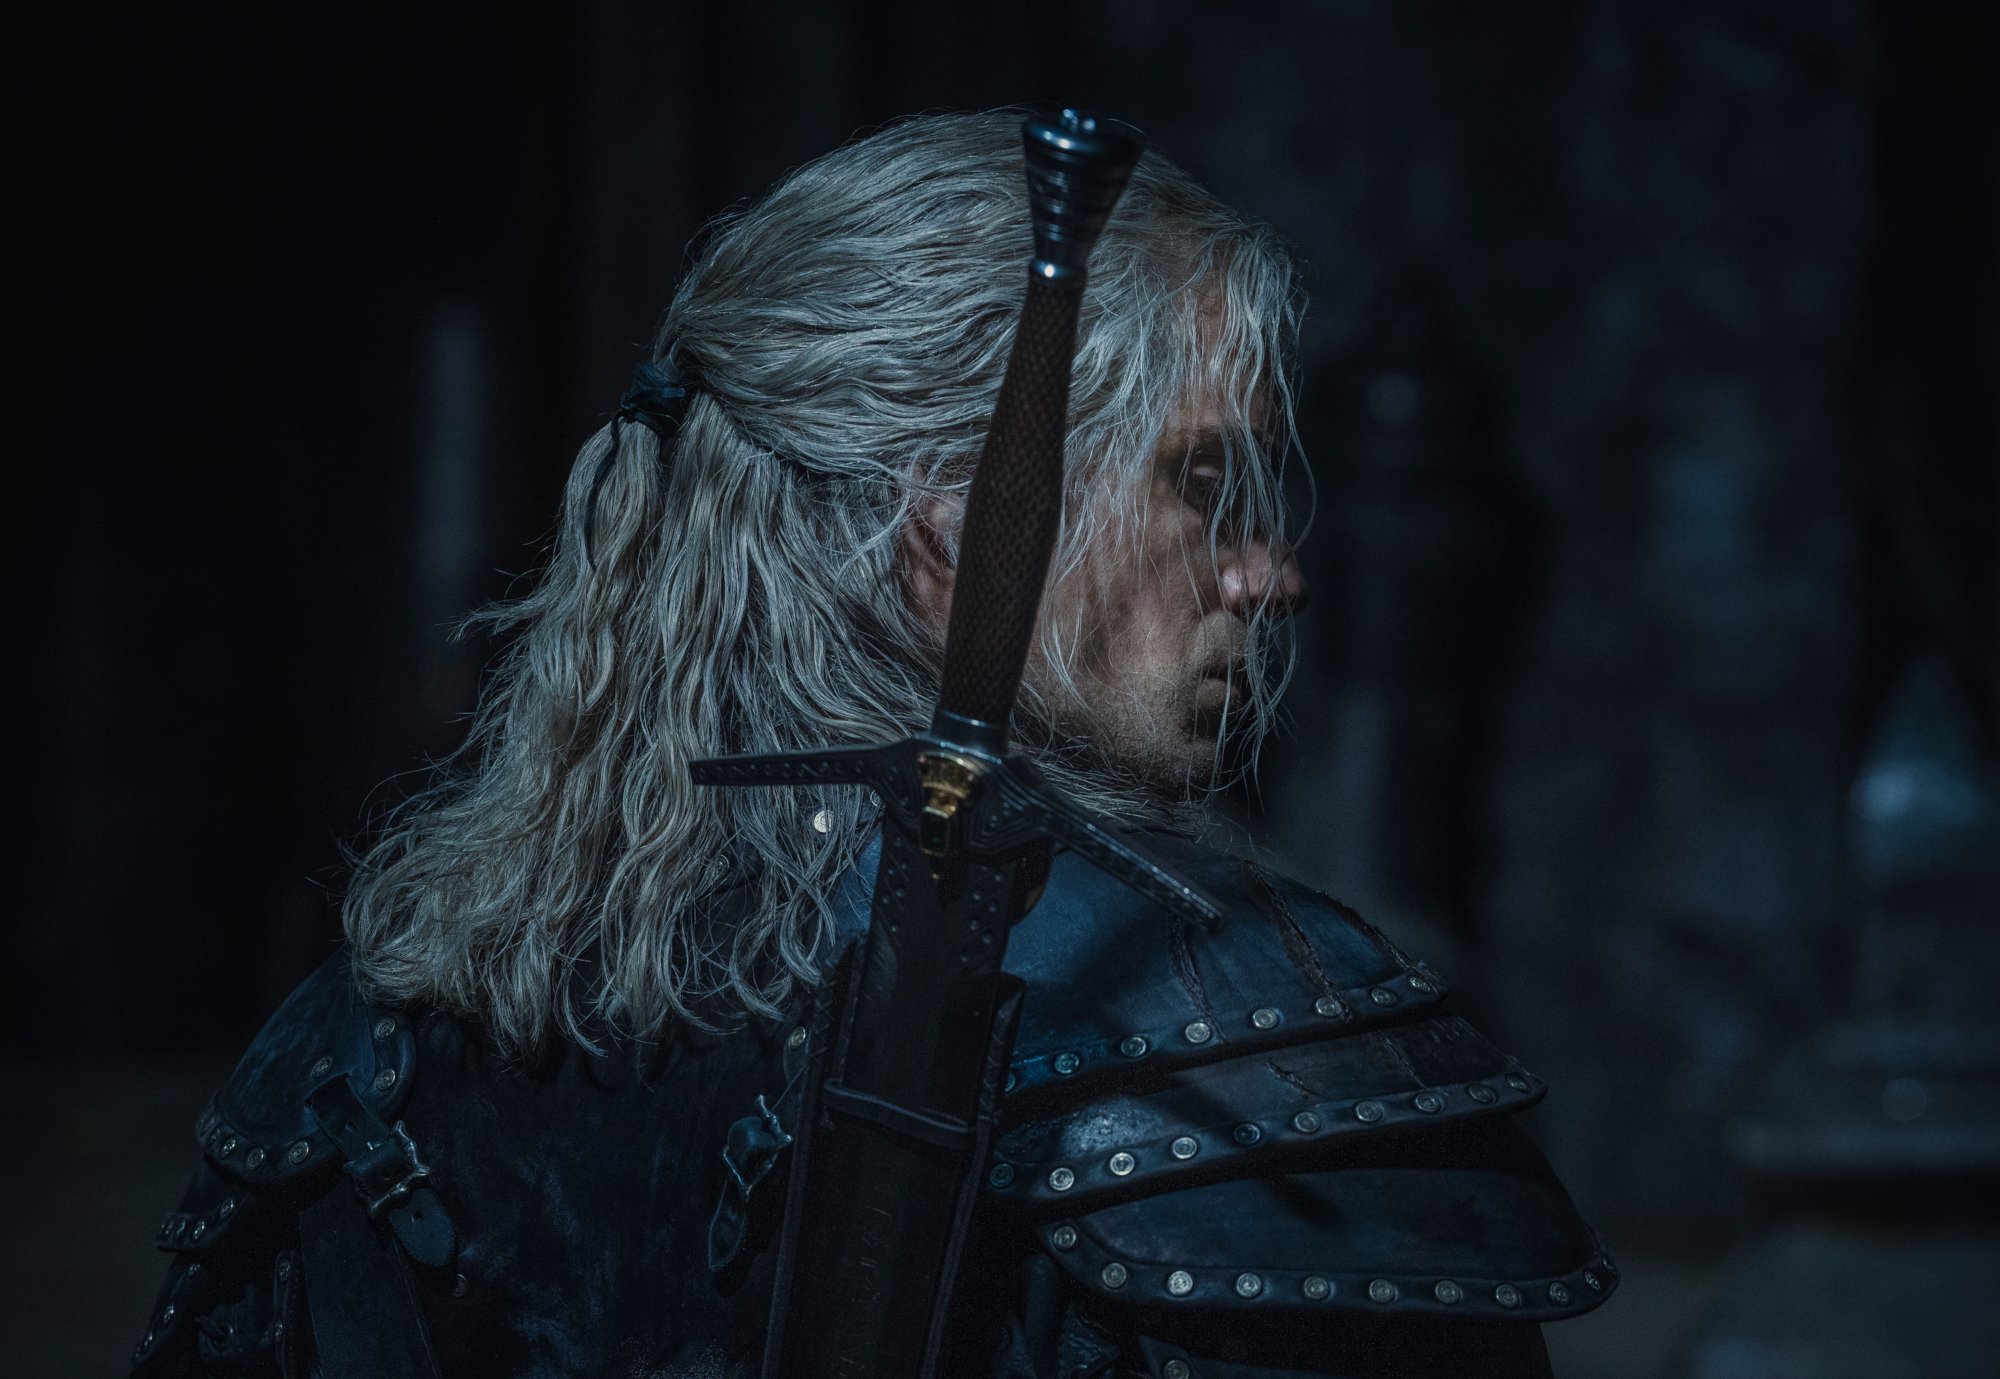 Henry Cavill as Geralt of Rivia in 'The Witcher,' which Netflix renewed for season 3. He's wearing black leather, his blonde hair is half-up, and he's turned away from the camera.